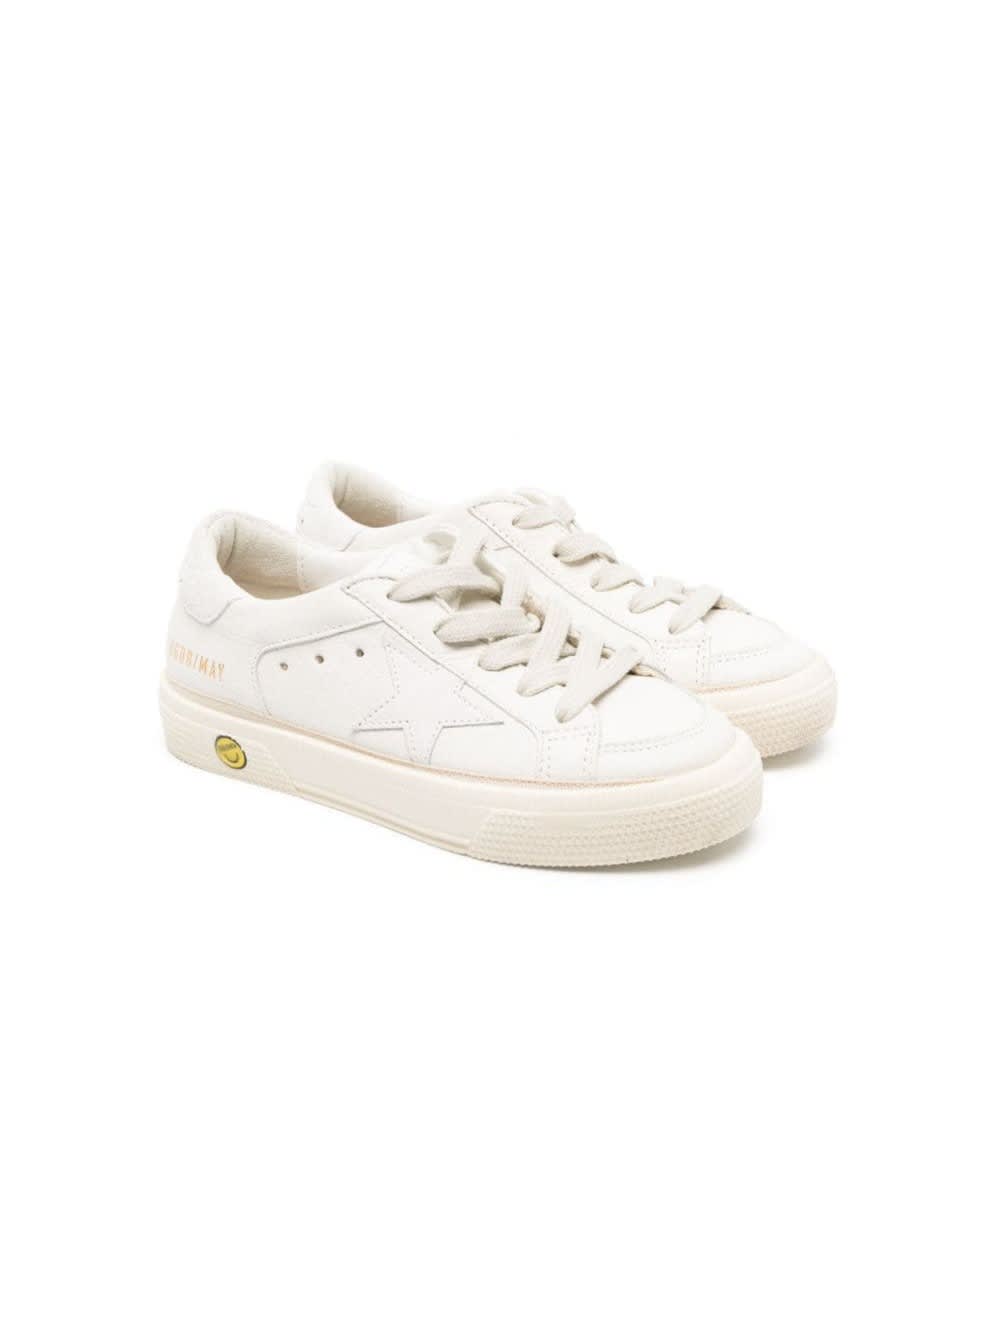 Golden Goose White Low Top Sneakers With Star Patch In Leather Boy